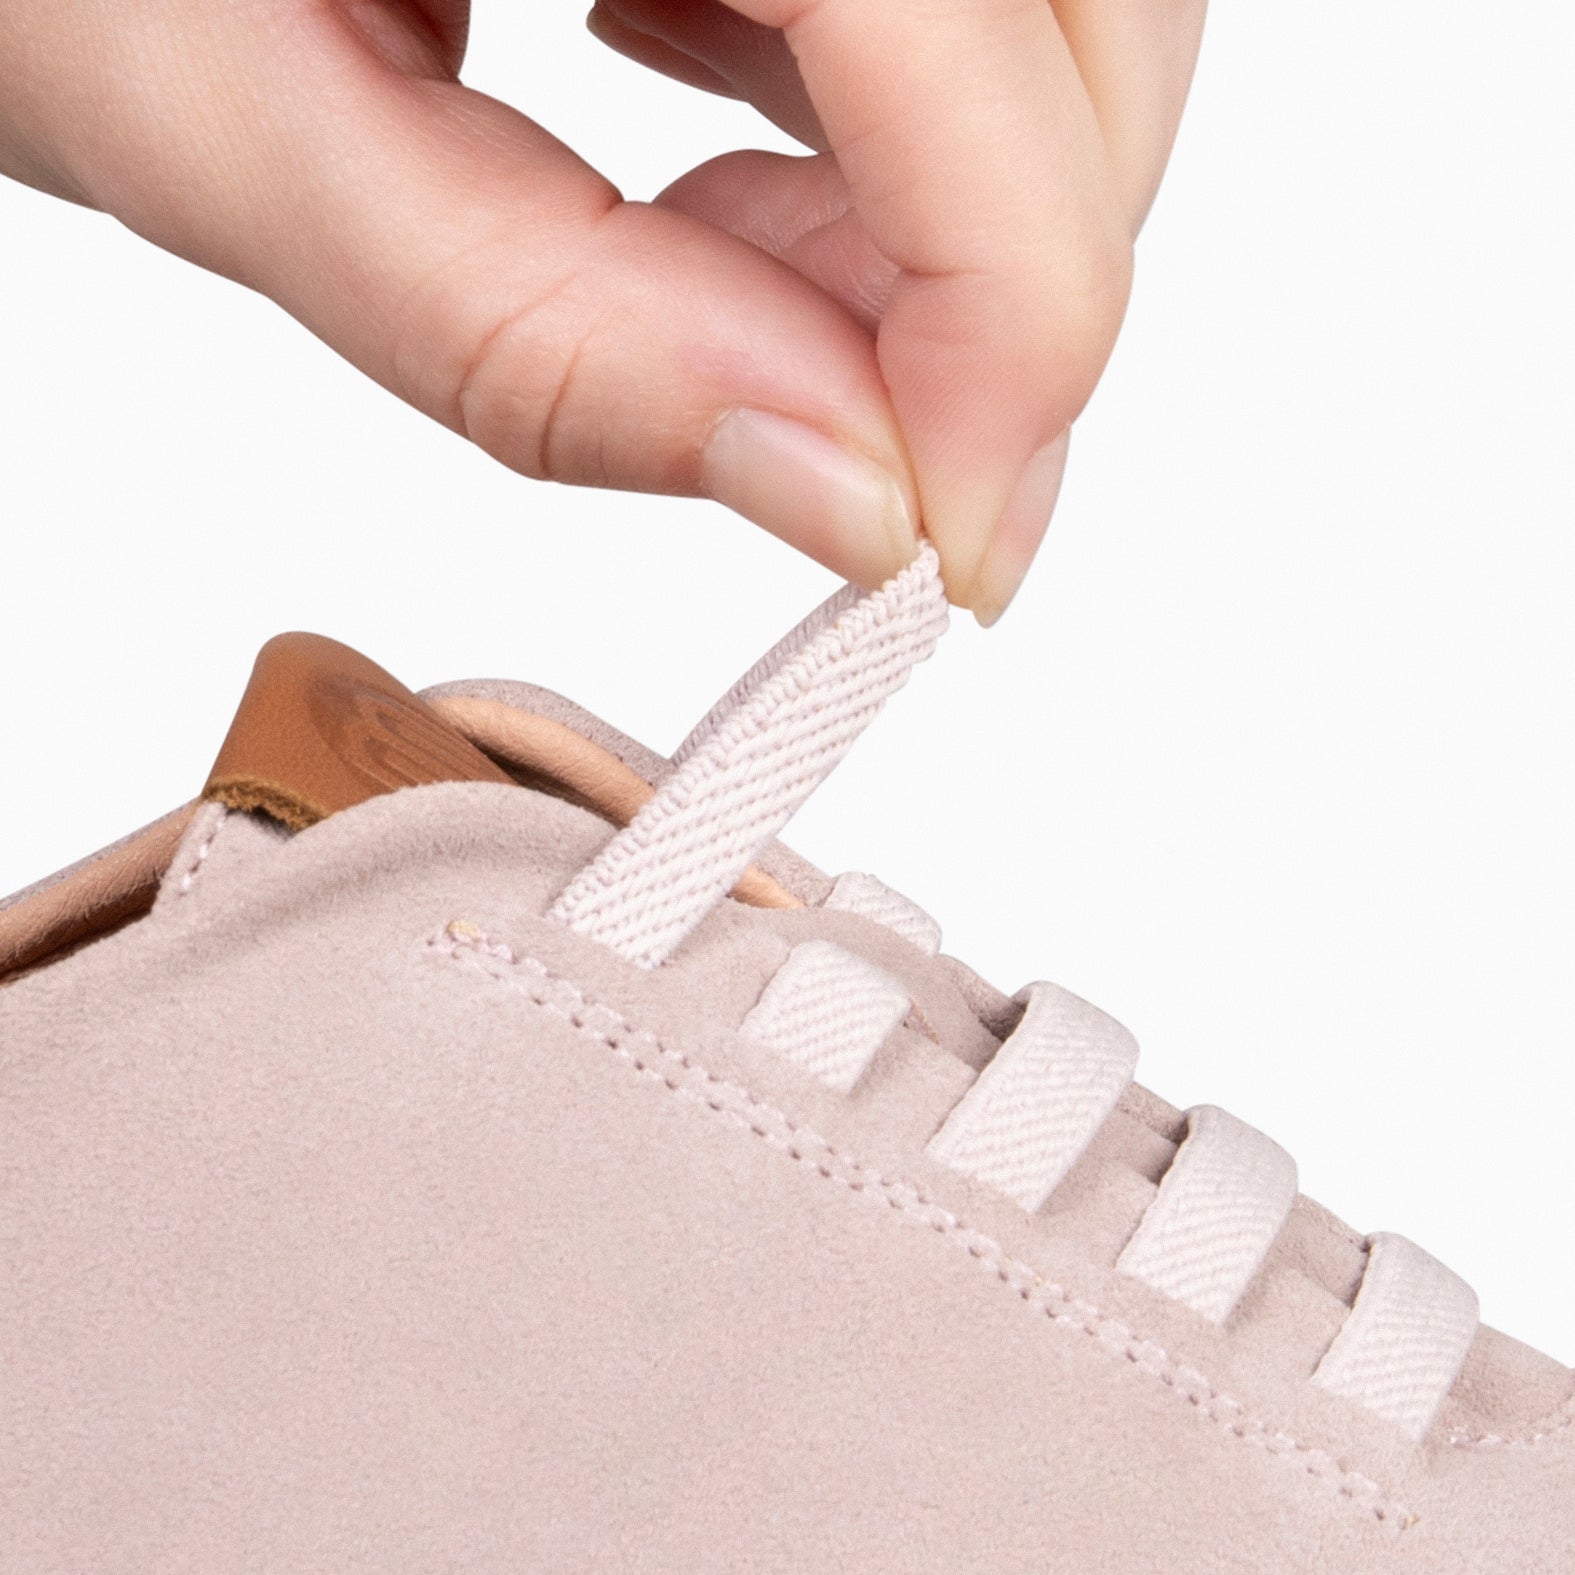 FLY – NUDE casual sneaker with elastic laces